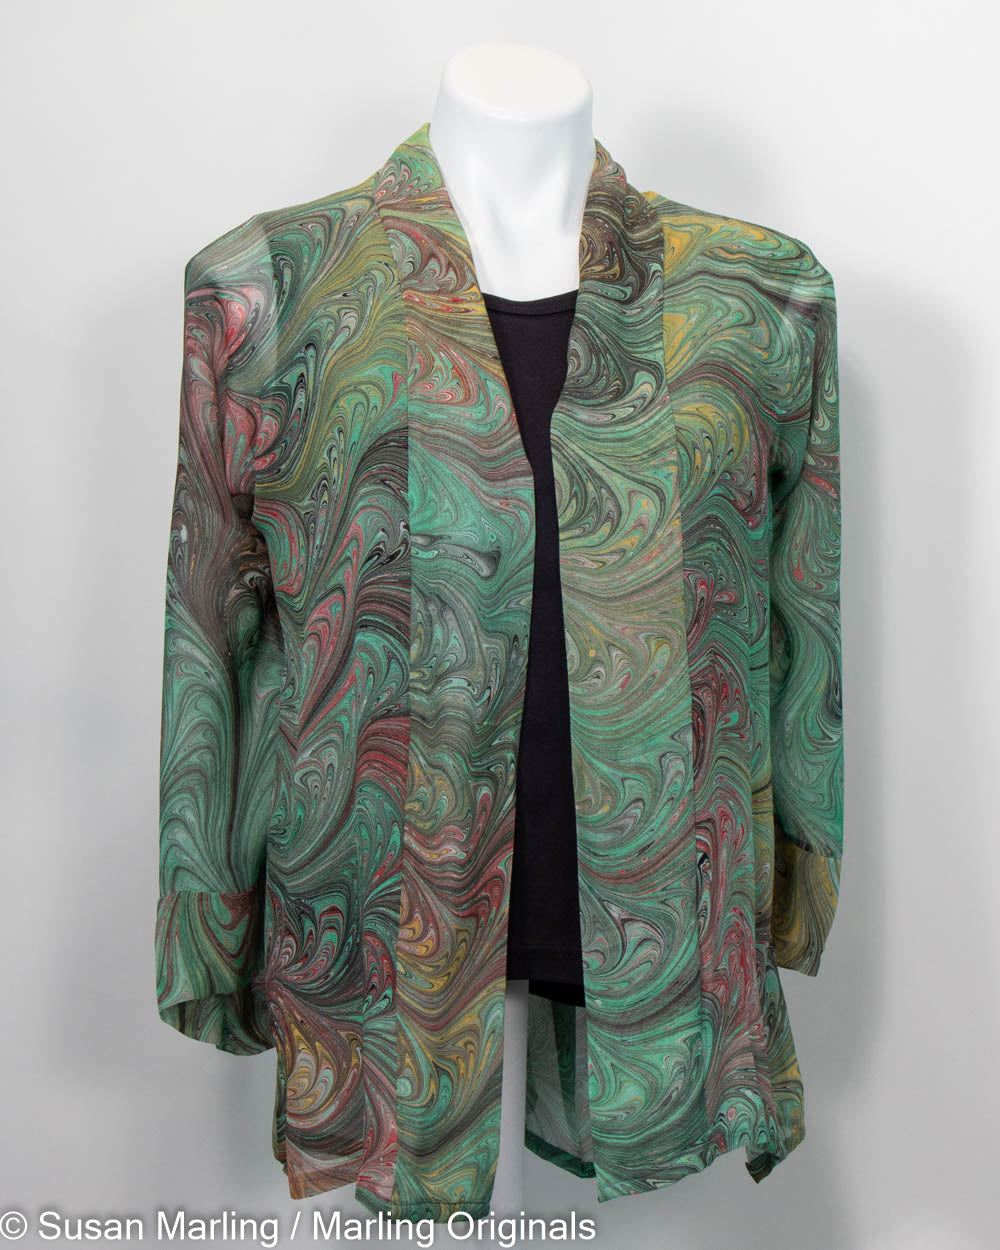 sheer kimono jacket in marbled pattern of warm green tones with sienna and gold